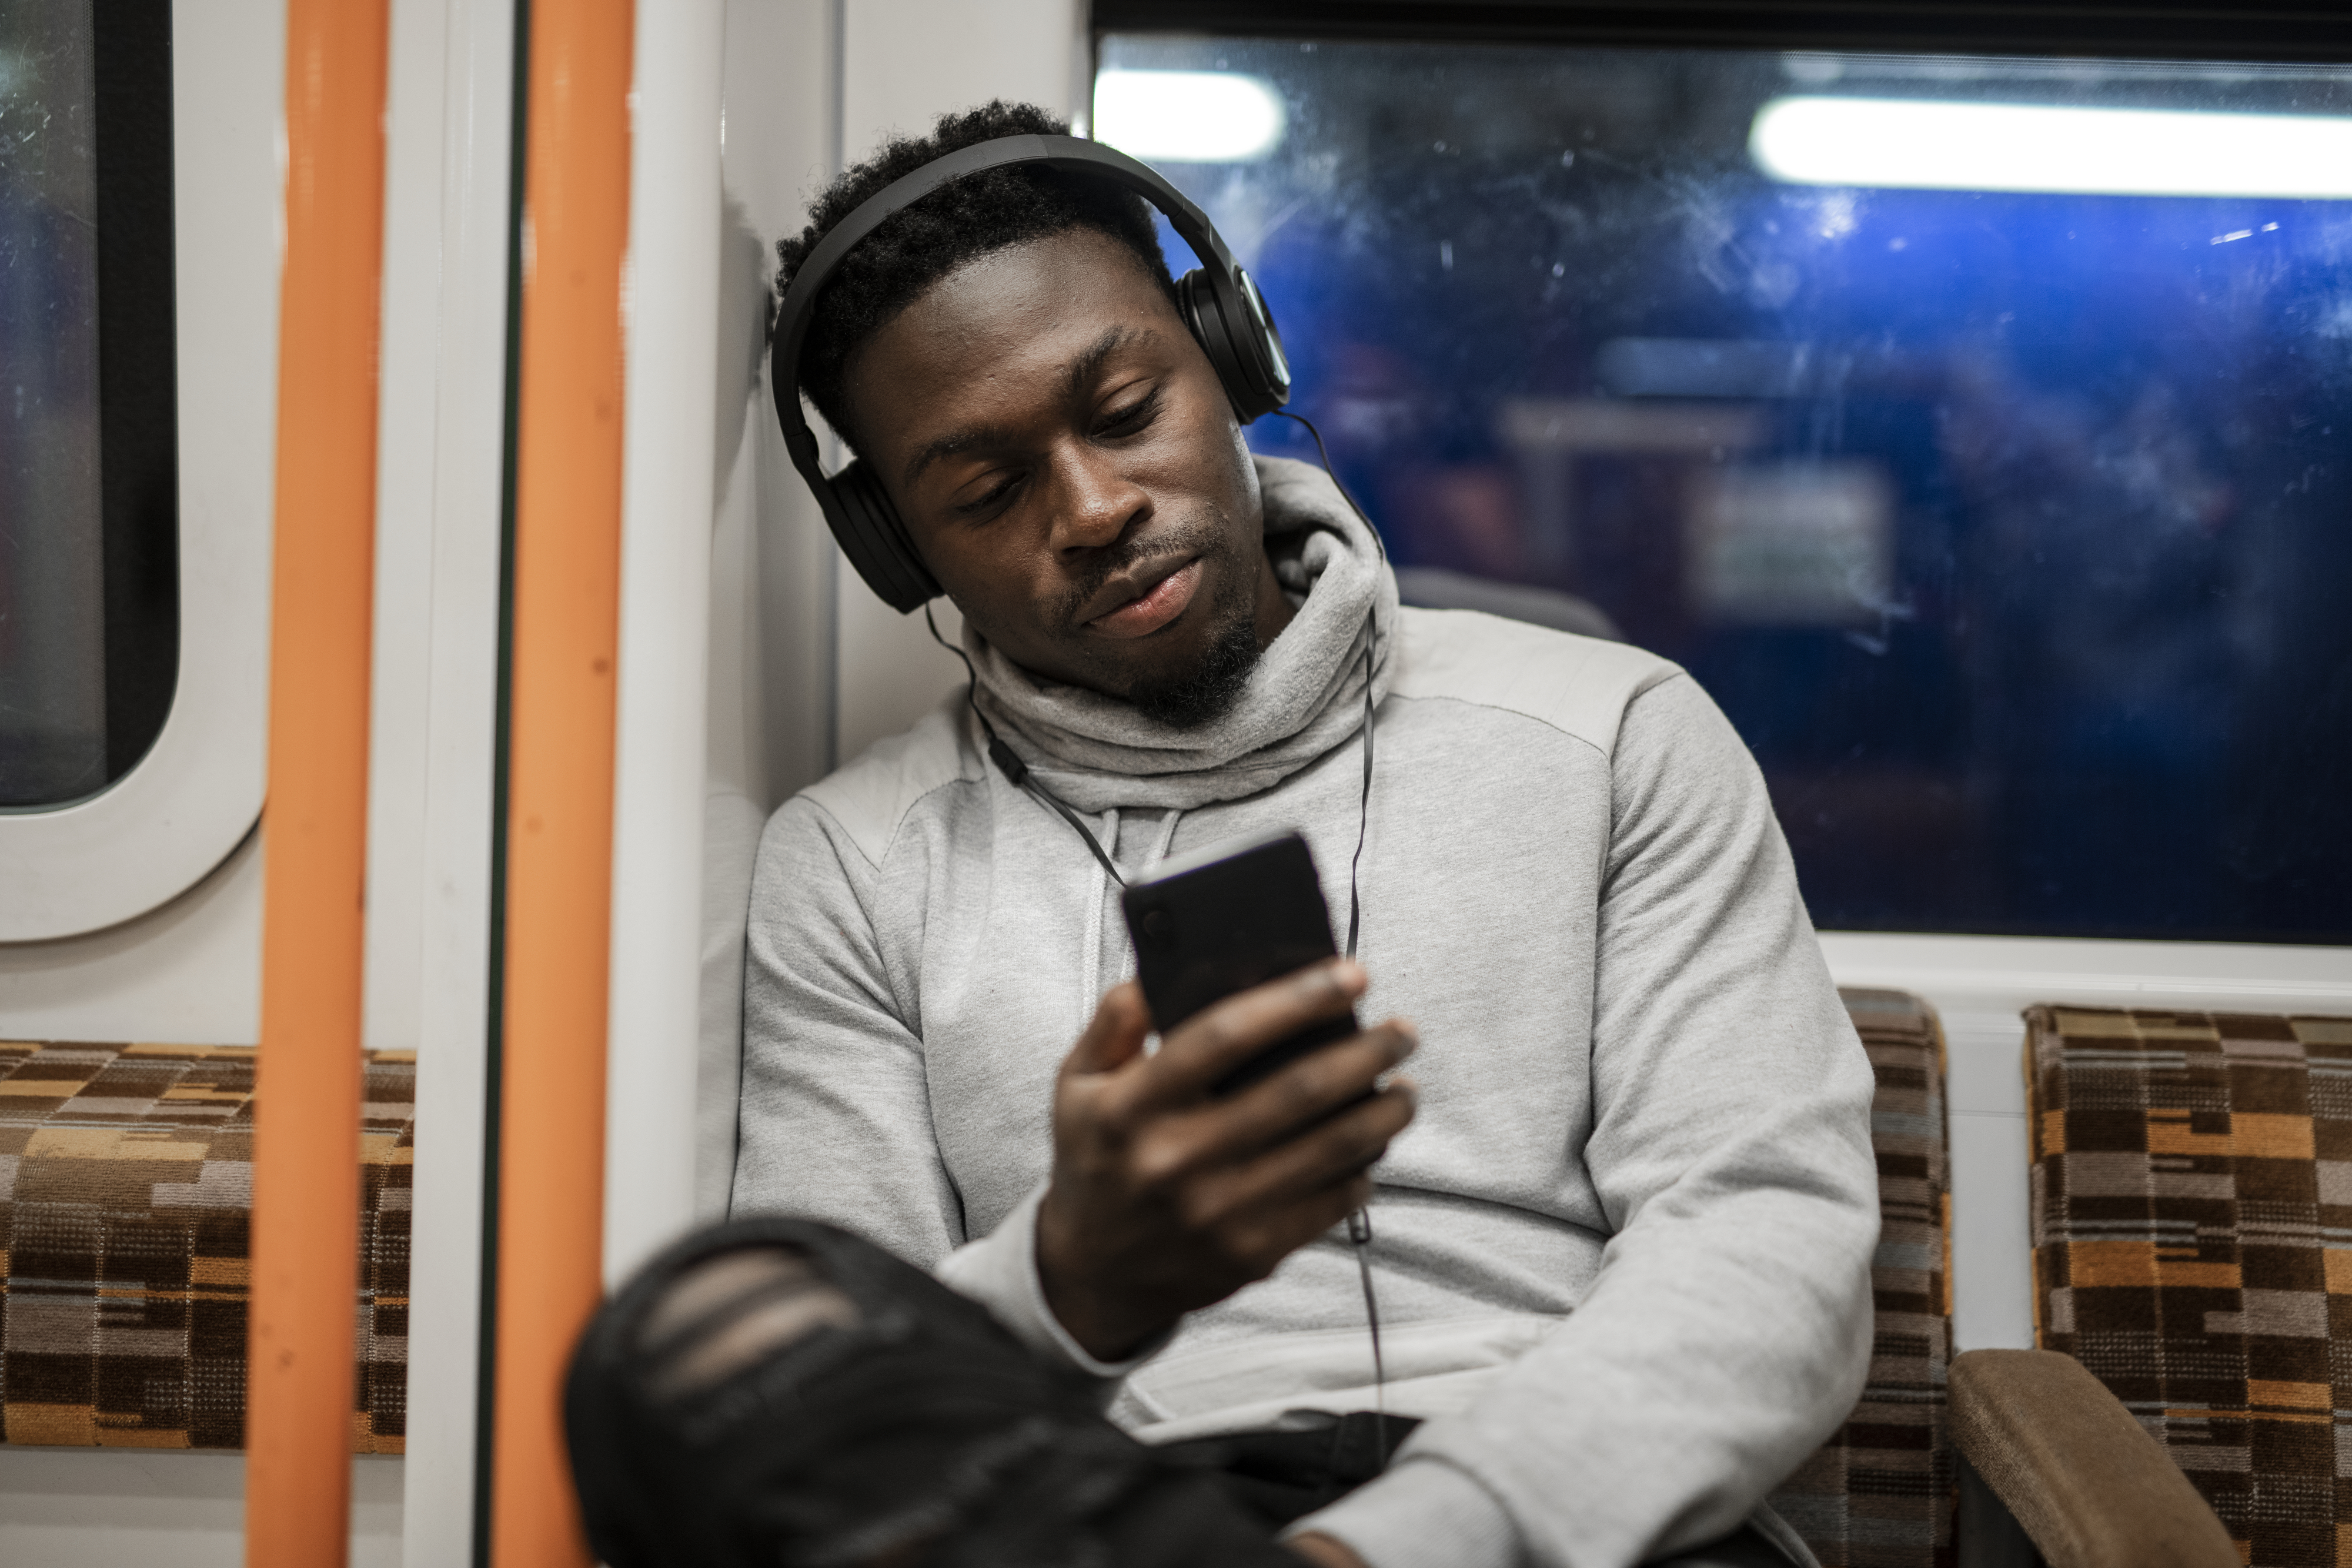 A man with headphones on using a smartphone while on public transit